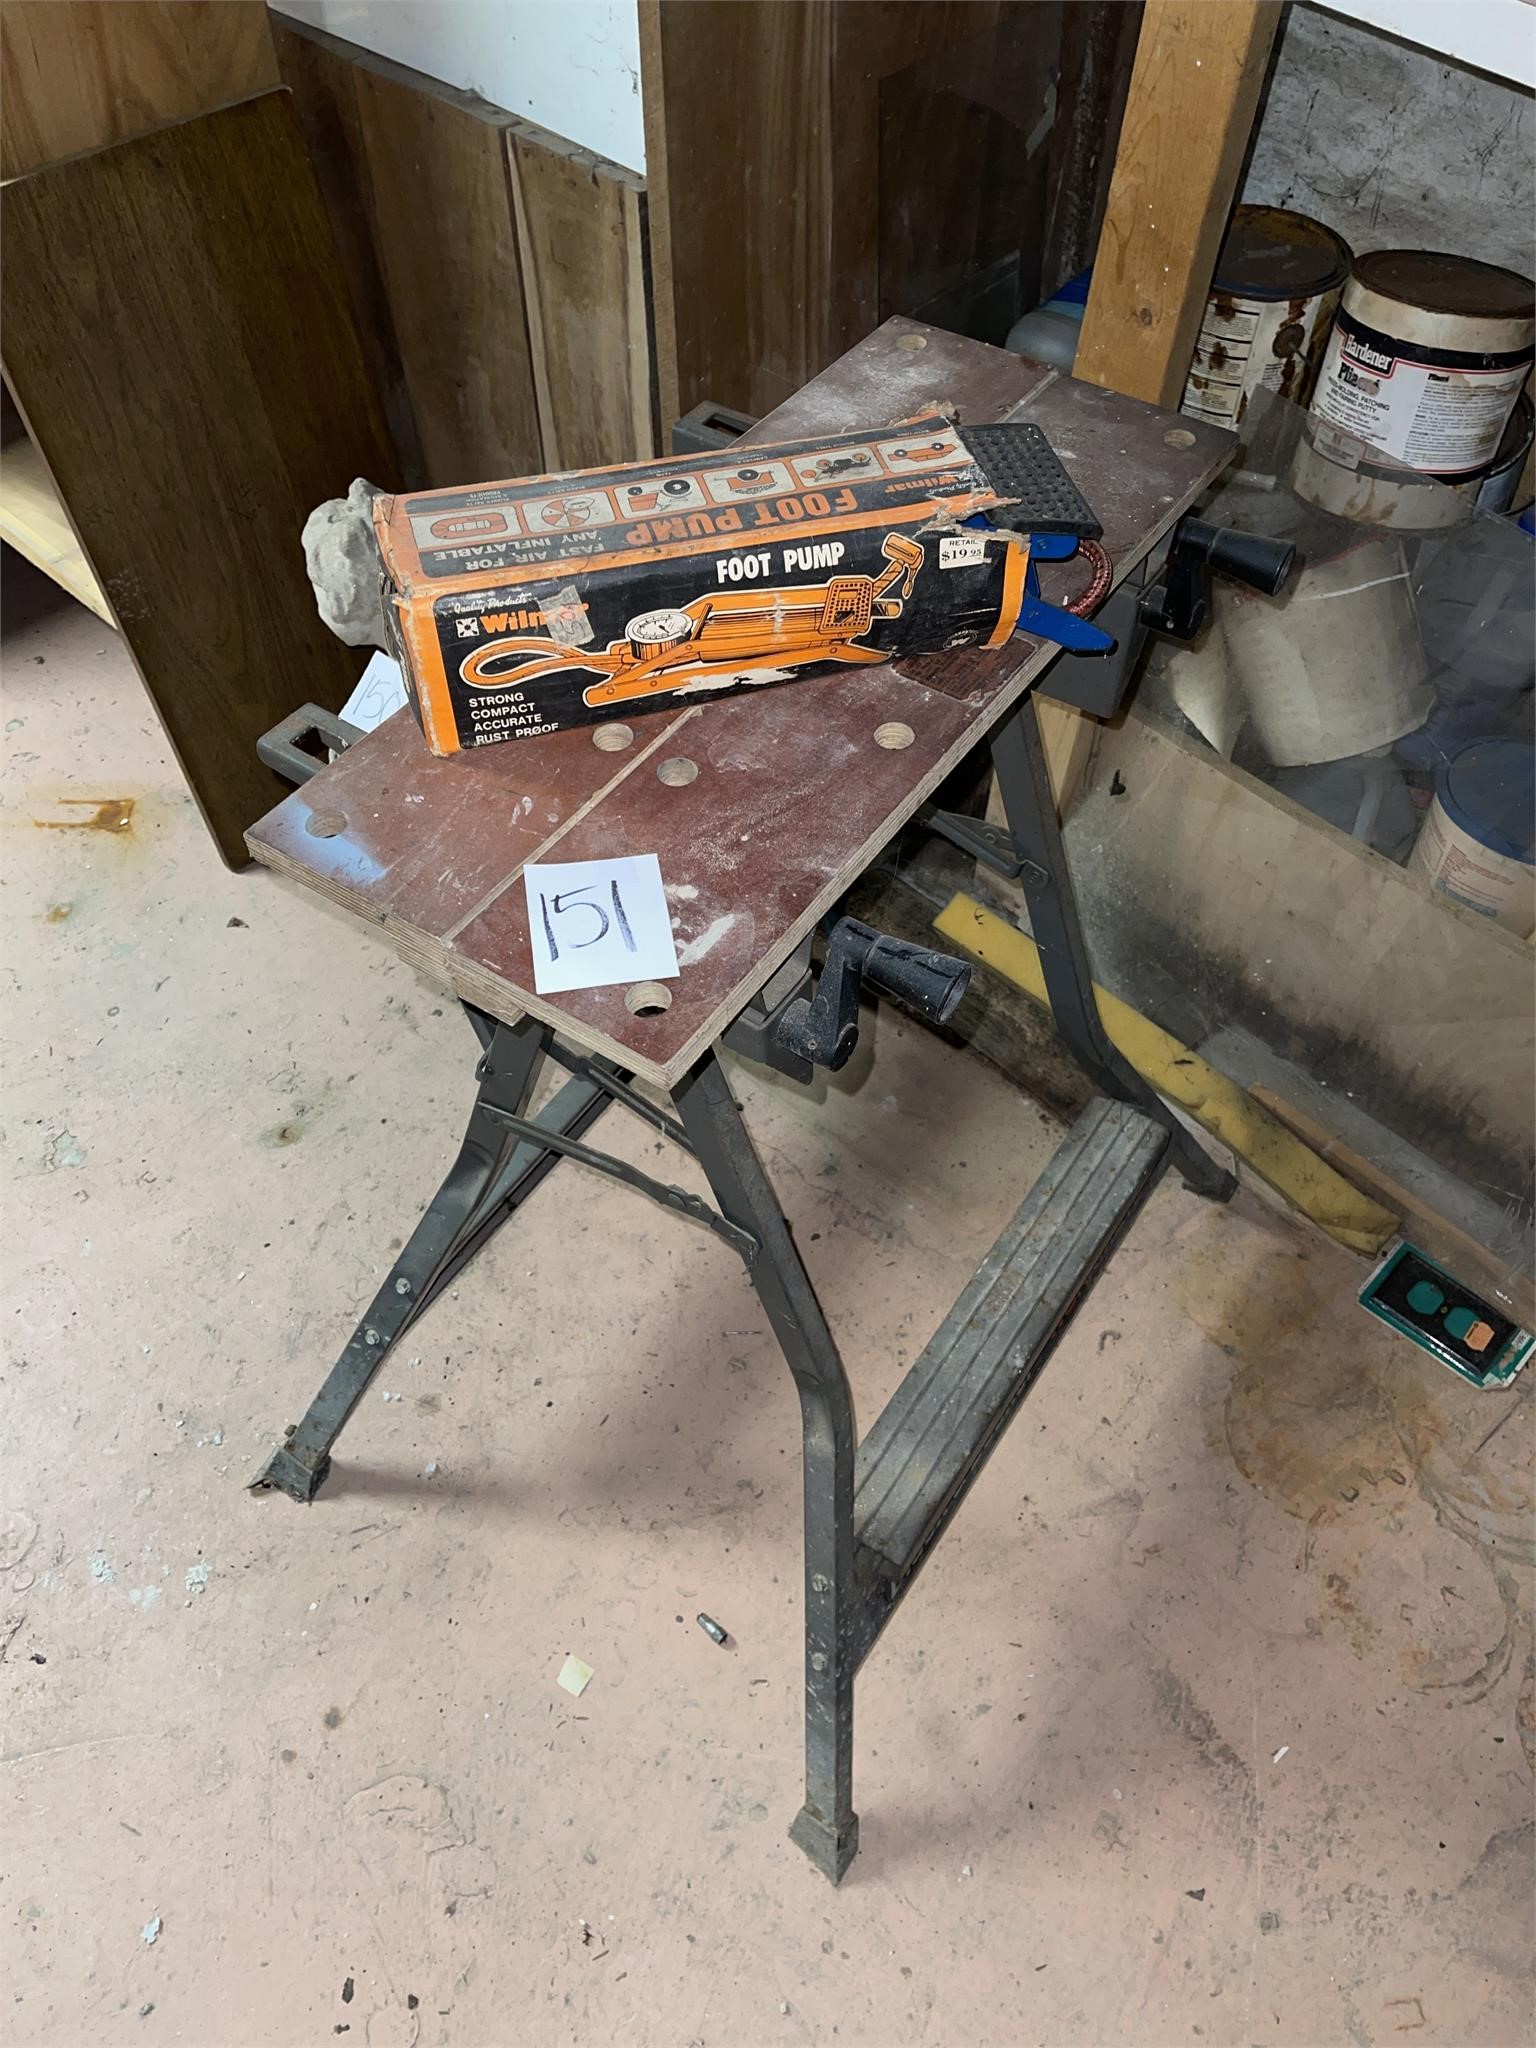 Work mate table and foot pump